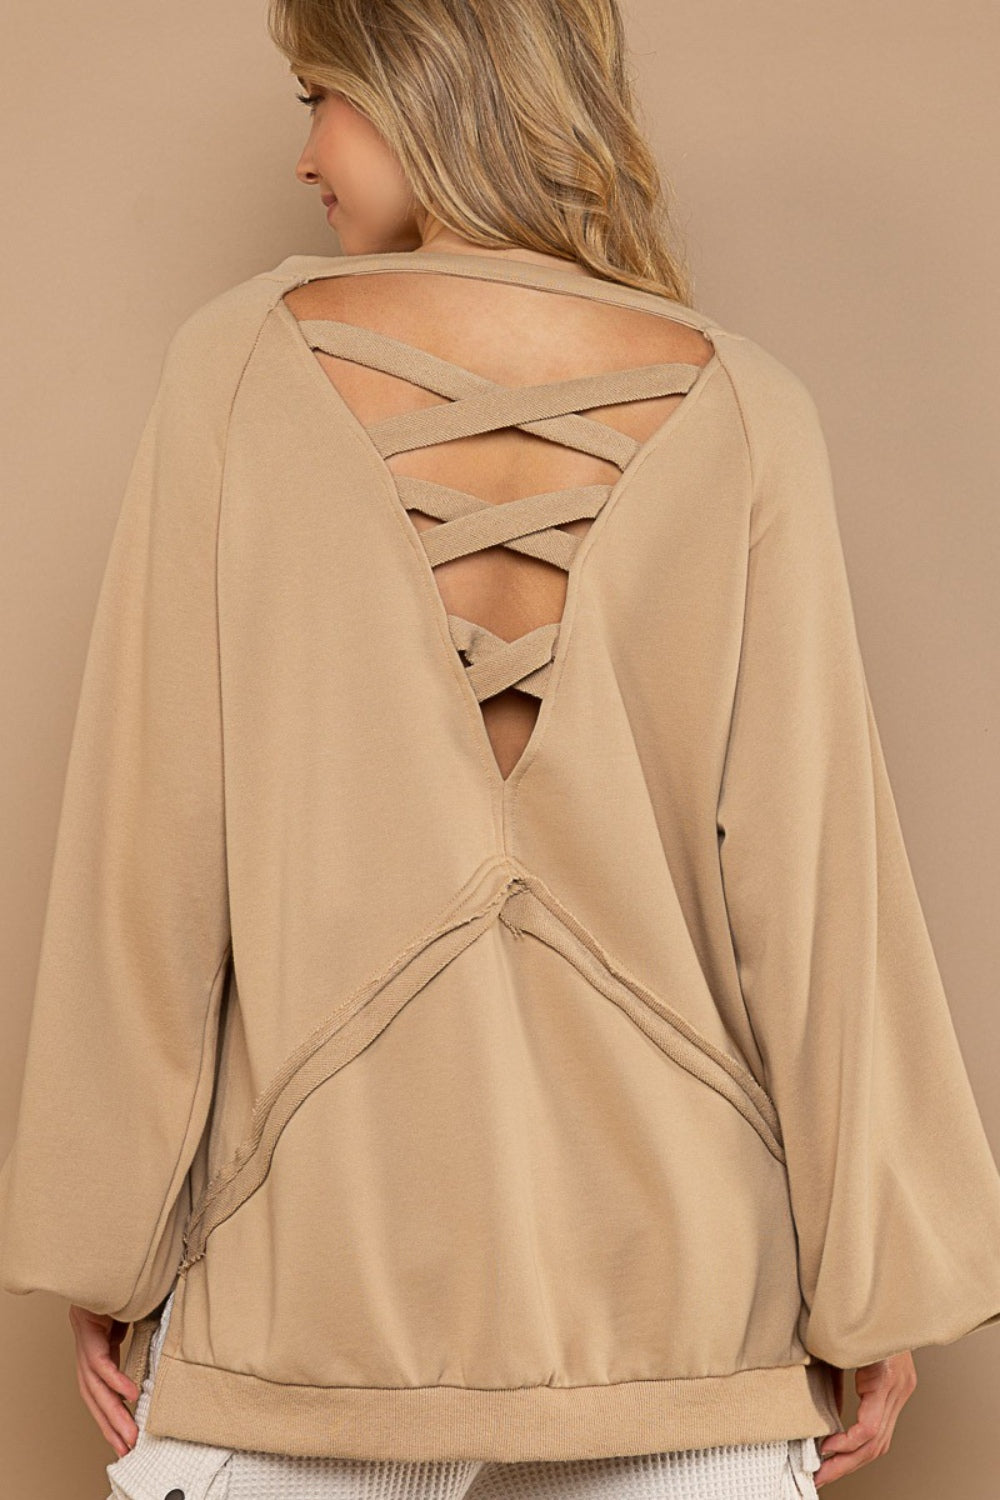 Rear view of the sweatshirt, highlighting the cross strap cutout design.